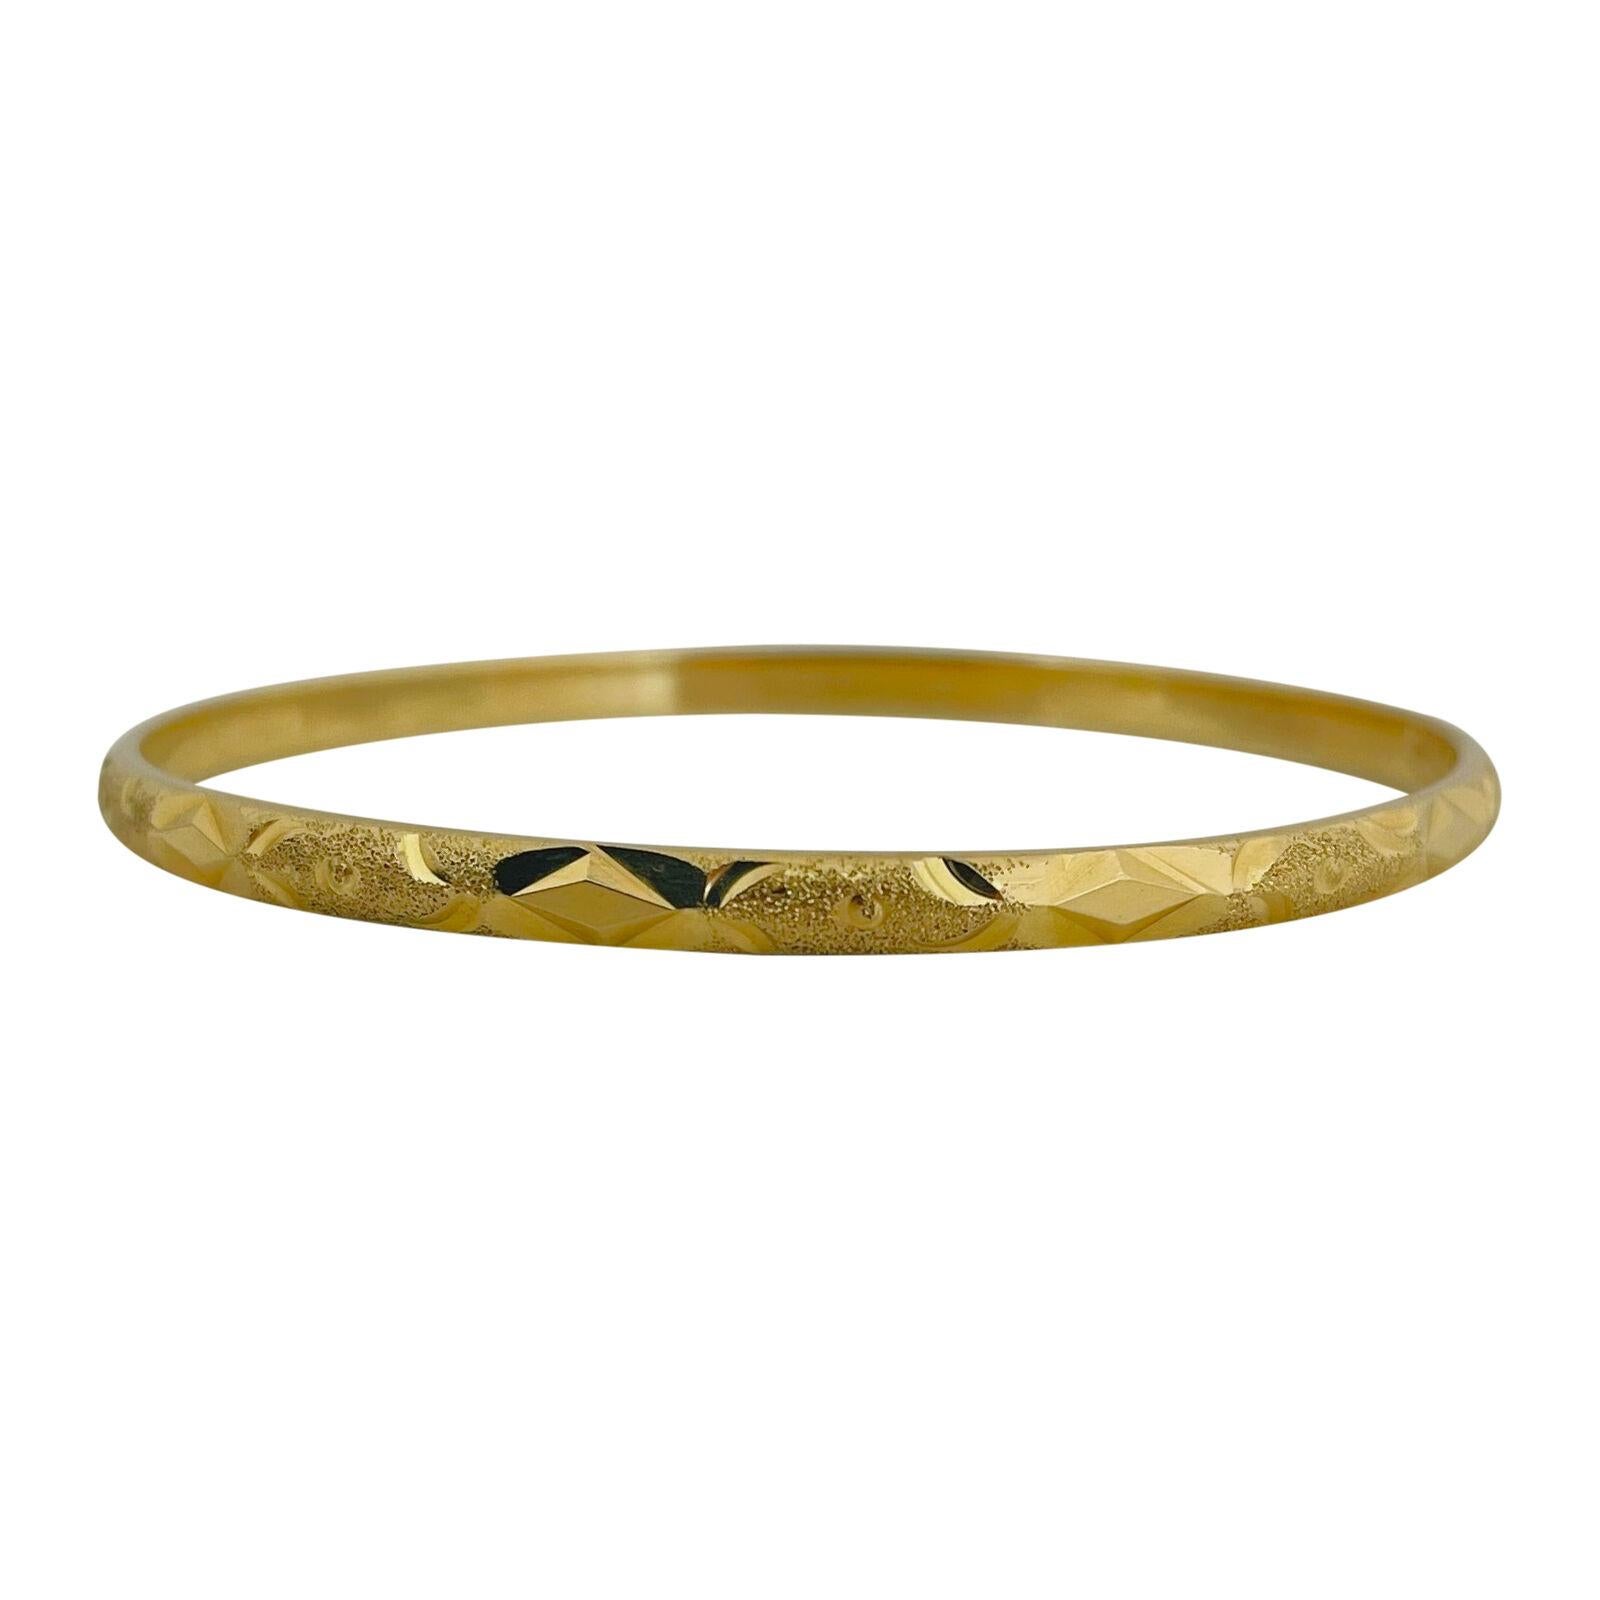 how much is an 18k gold bracelet worth